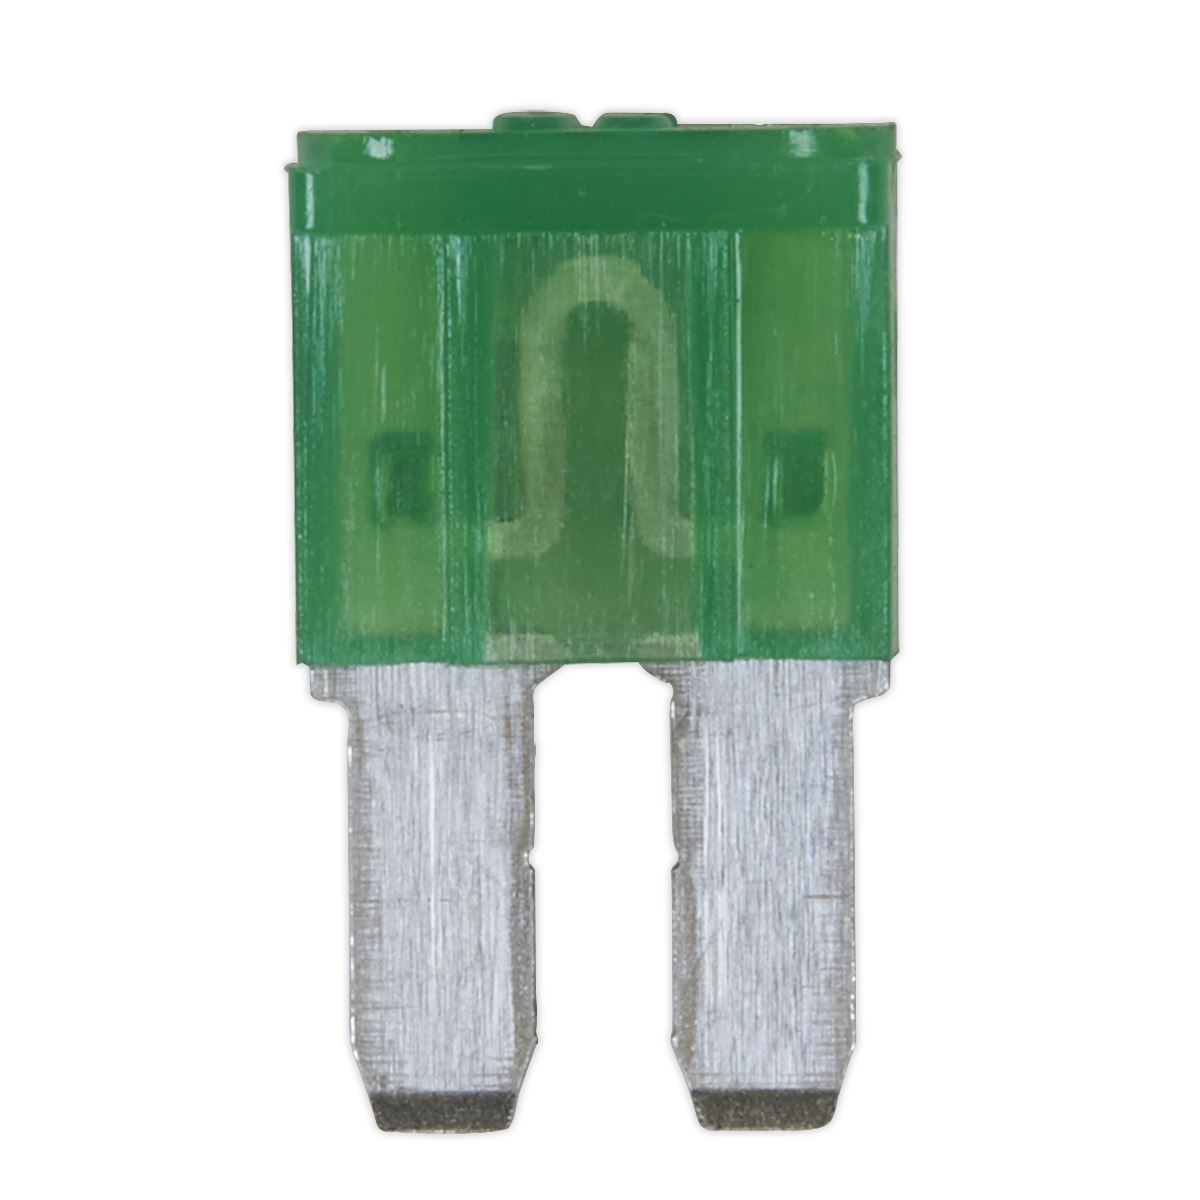 Sealey Automotive MICRO II Blade Fuse 30A - Pack of 50